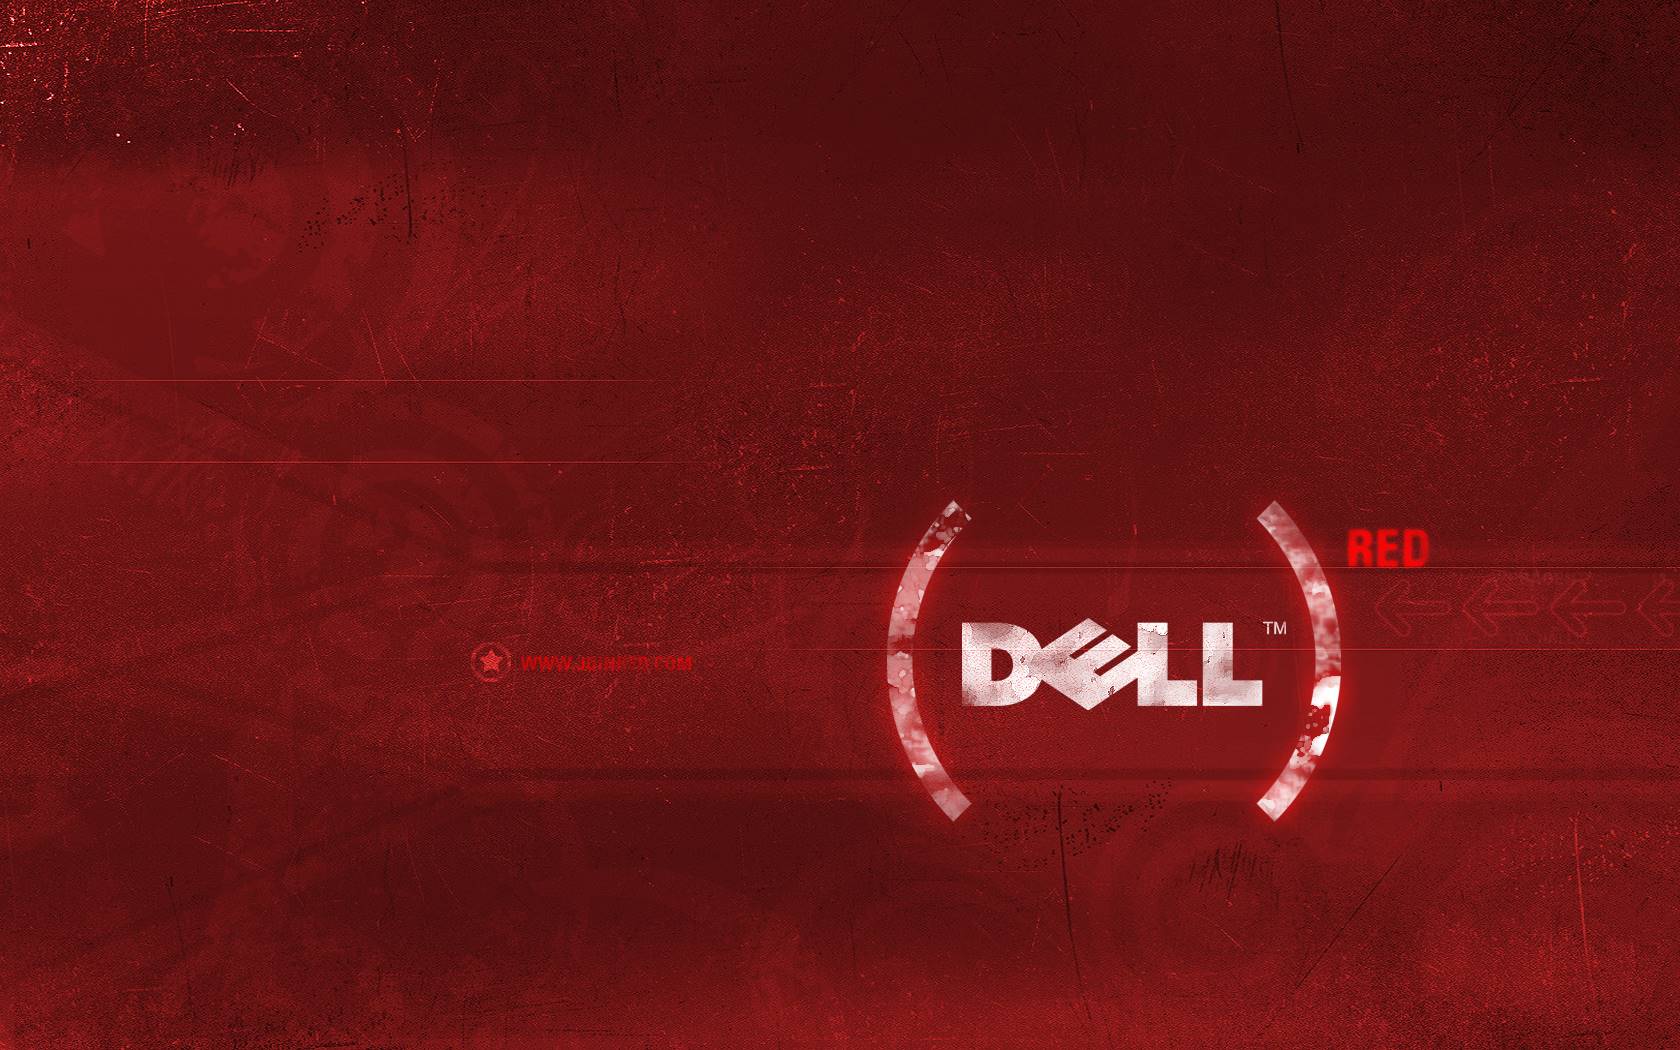 [50+] Wallpapers for Dell Inspiron on WallpaperSafari